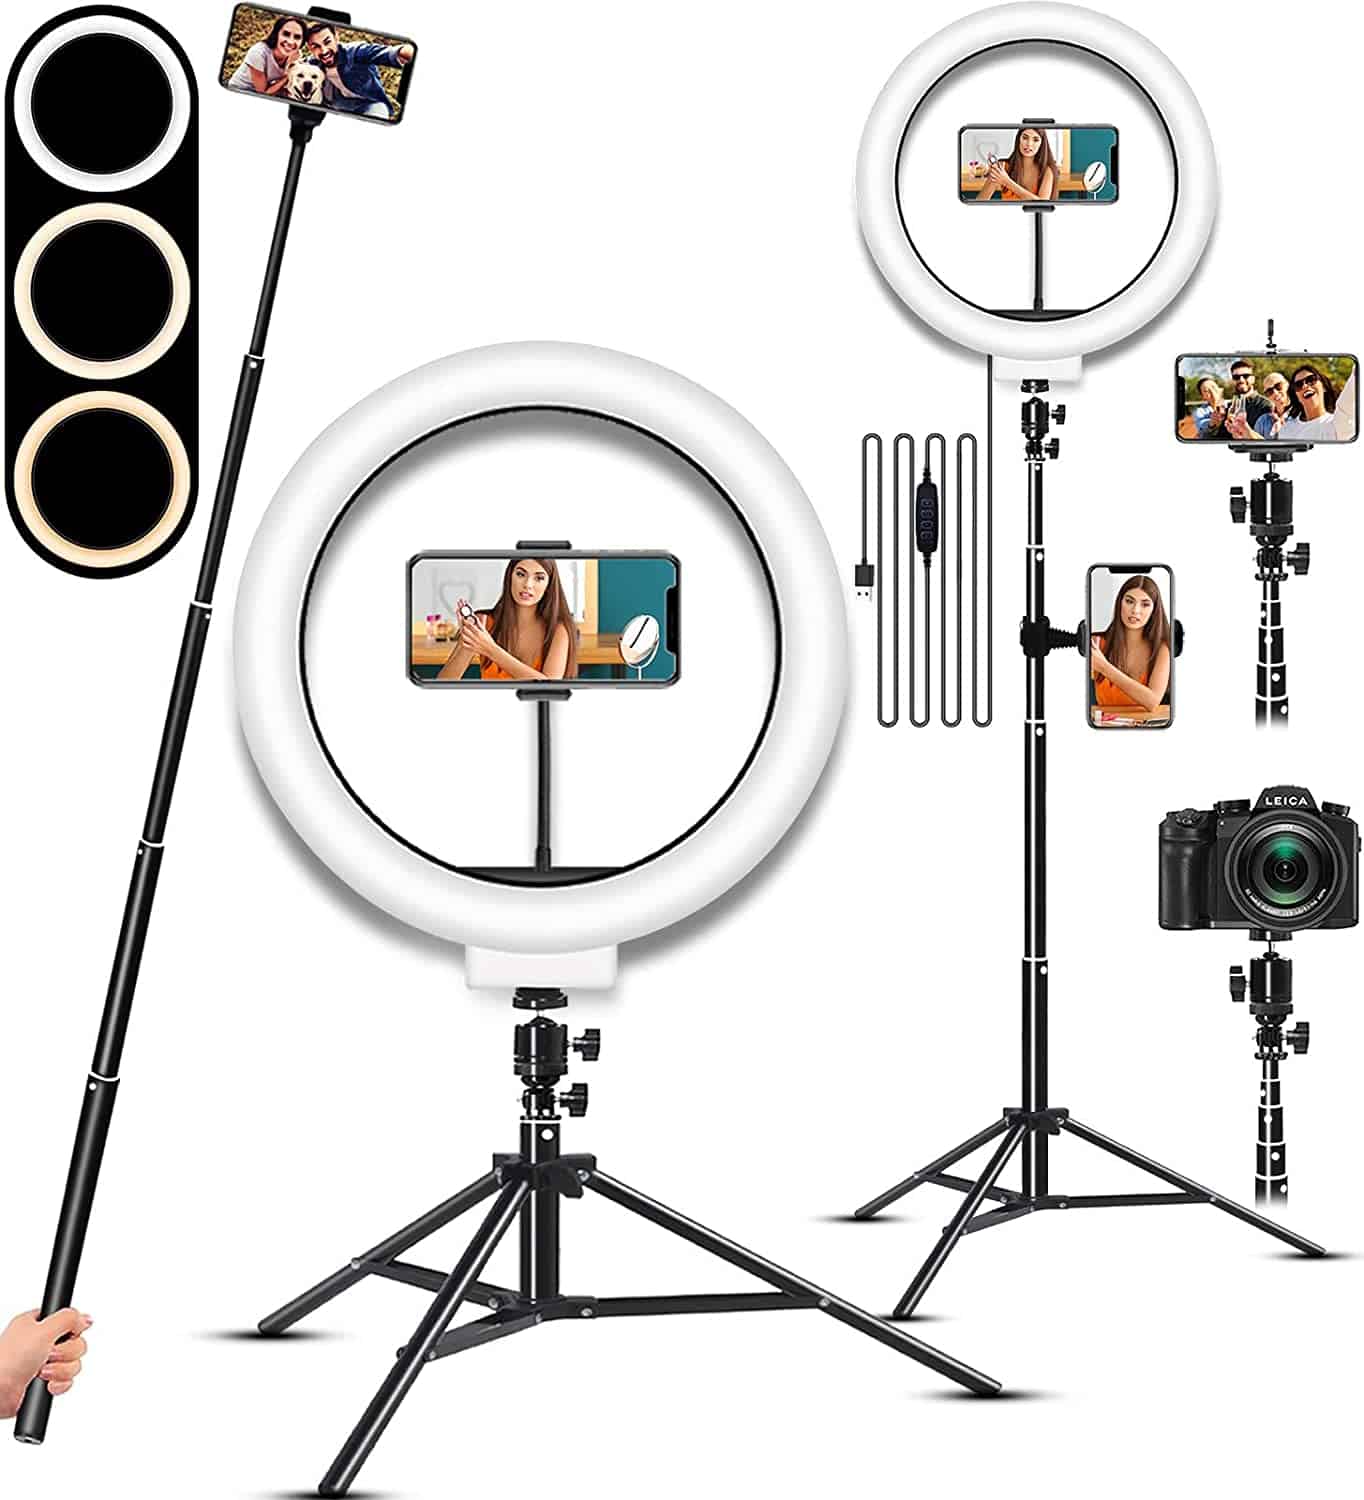 Lighting equipment is crucial to mobile streaming, especially for beginners